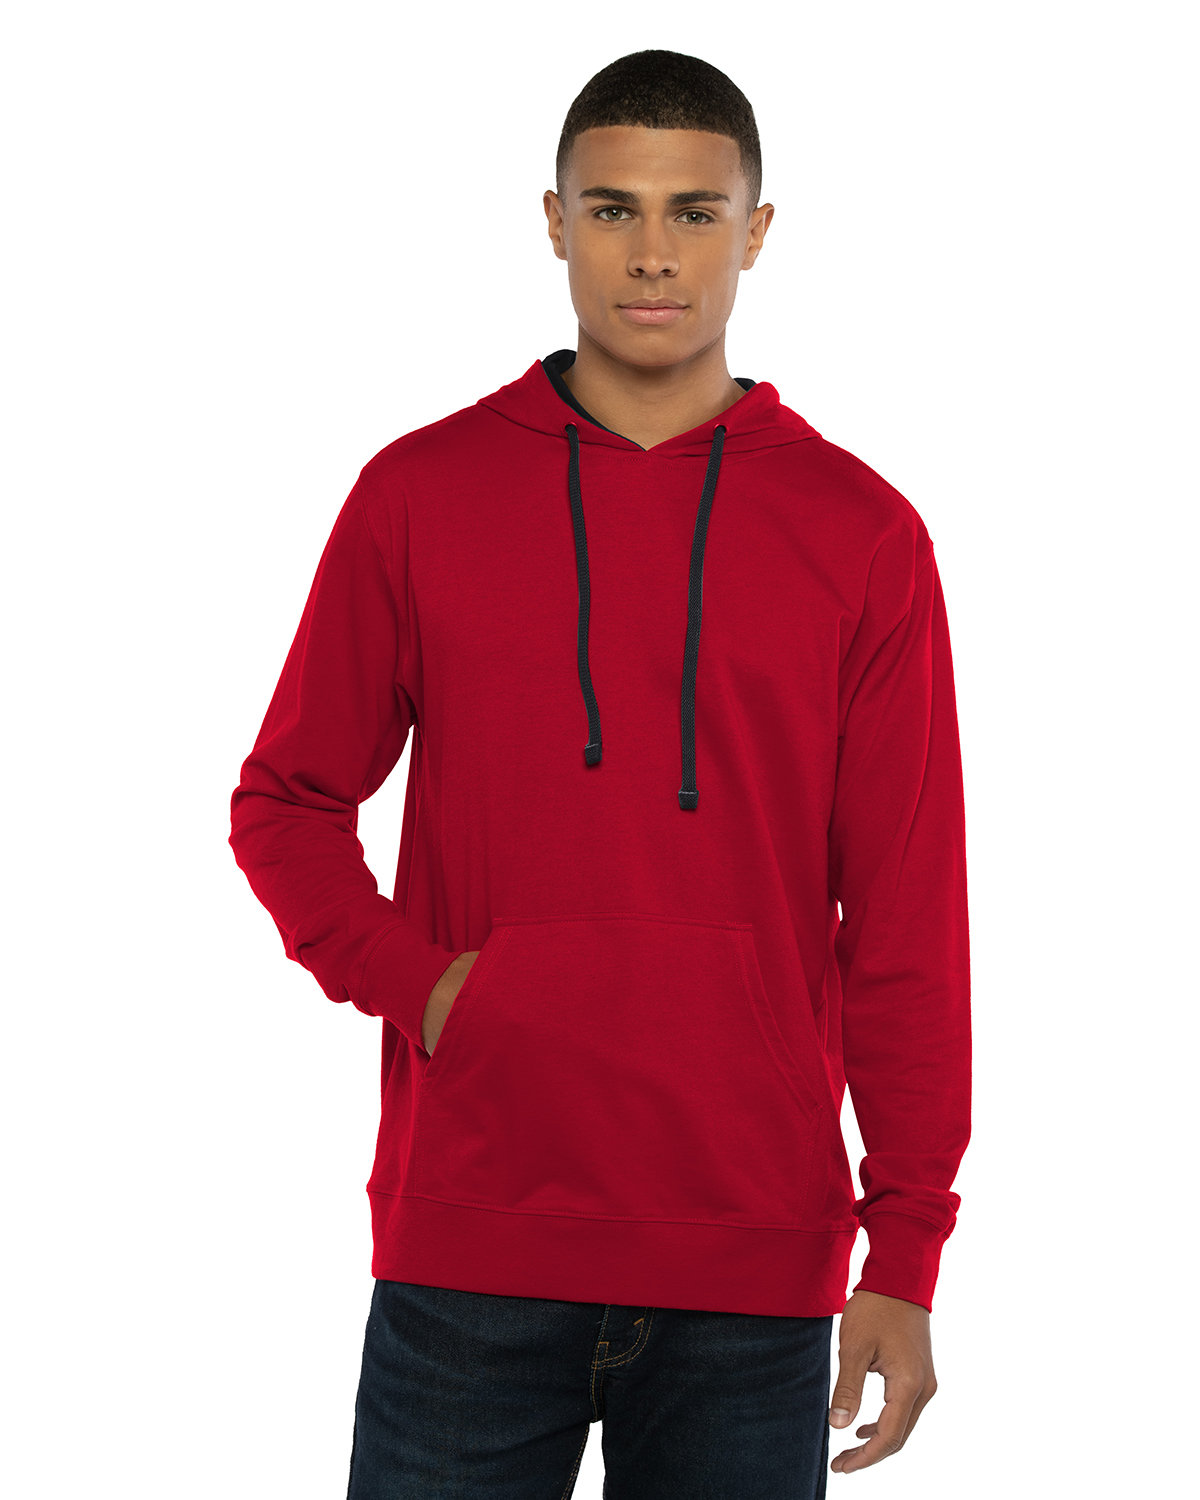 Next Level Unisex Laguna French Terry Pullover Hooded Sweatshirt RED/ BLACK 